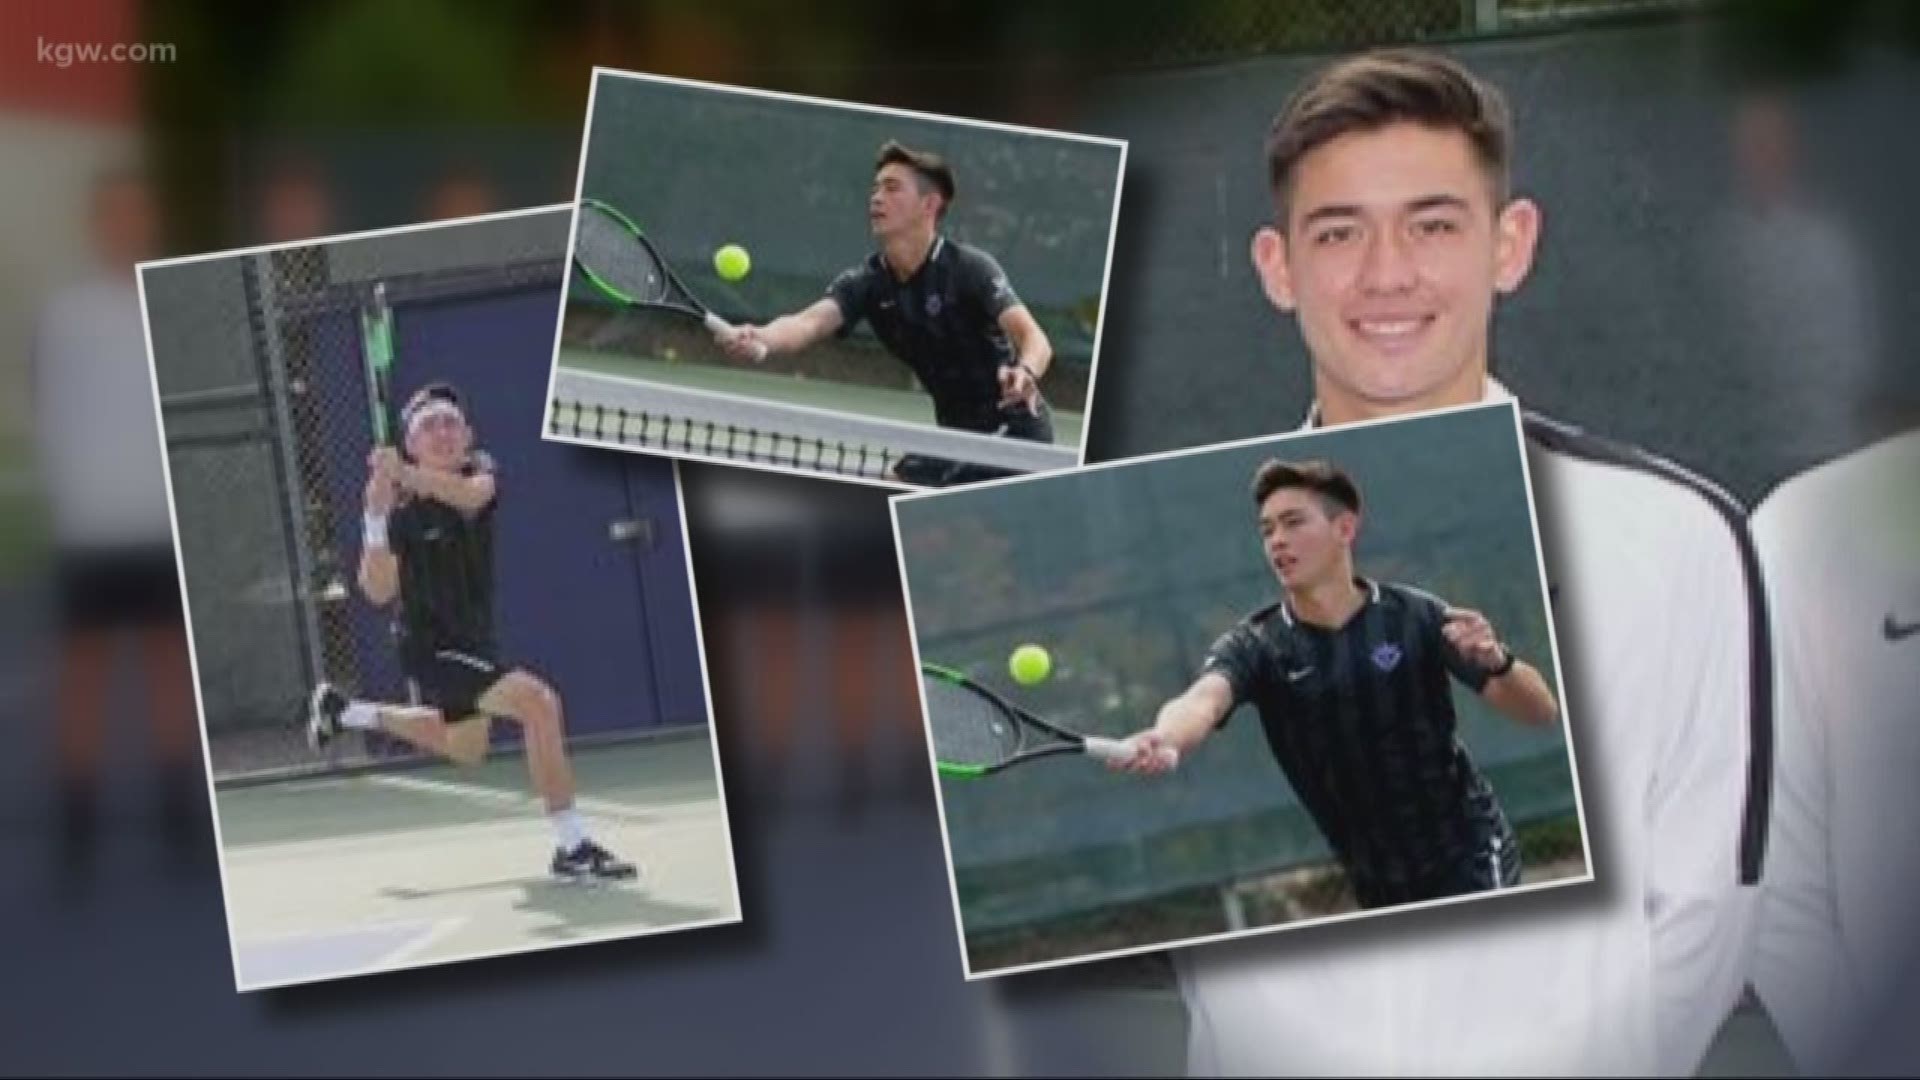 An inspiring story about a University of Portland tennis player who overcame a brain tumor.